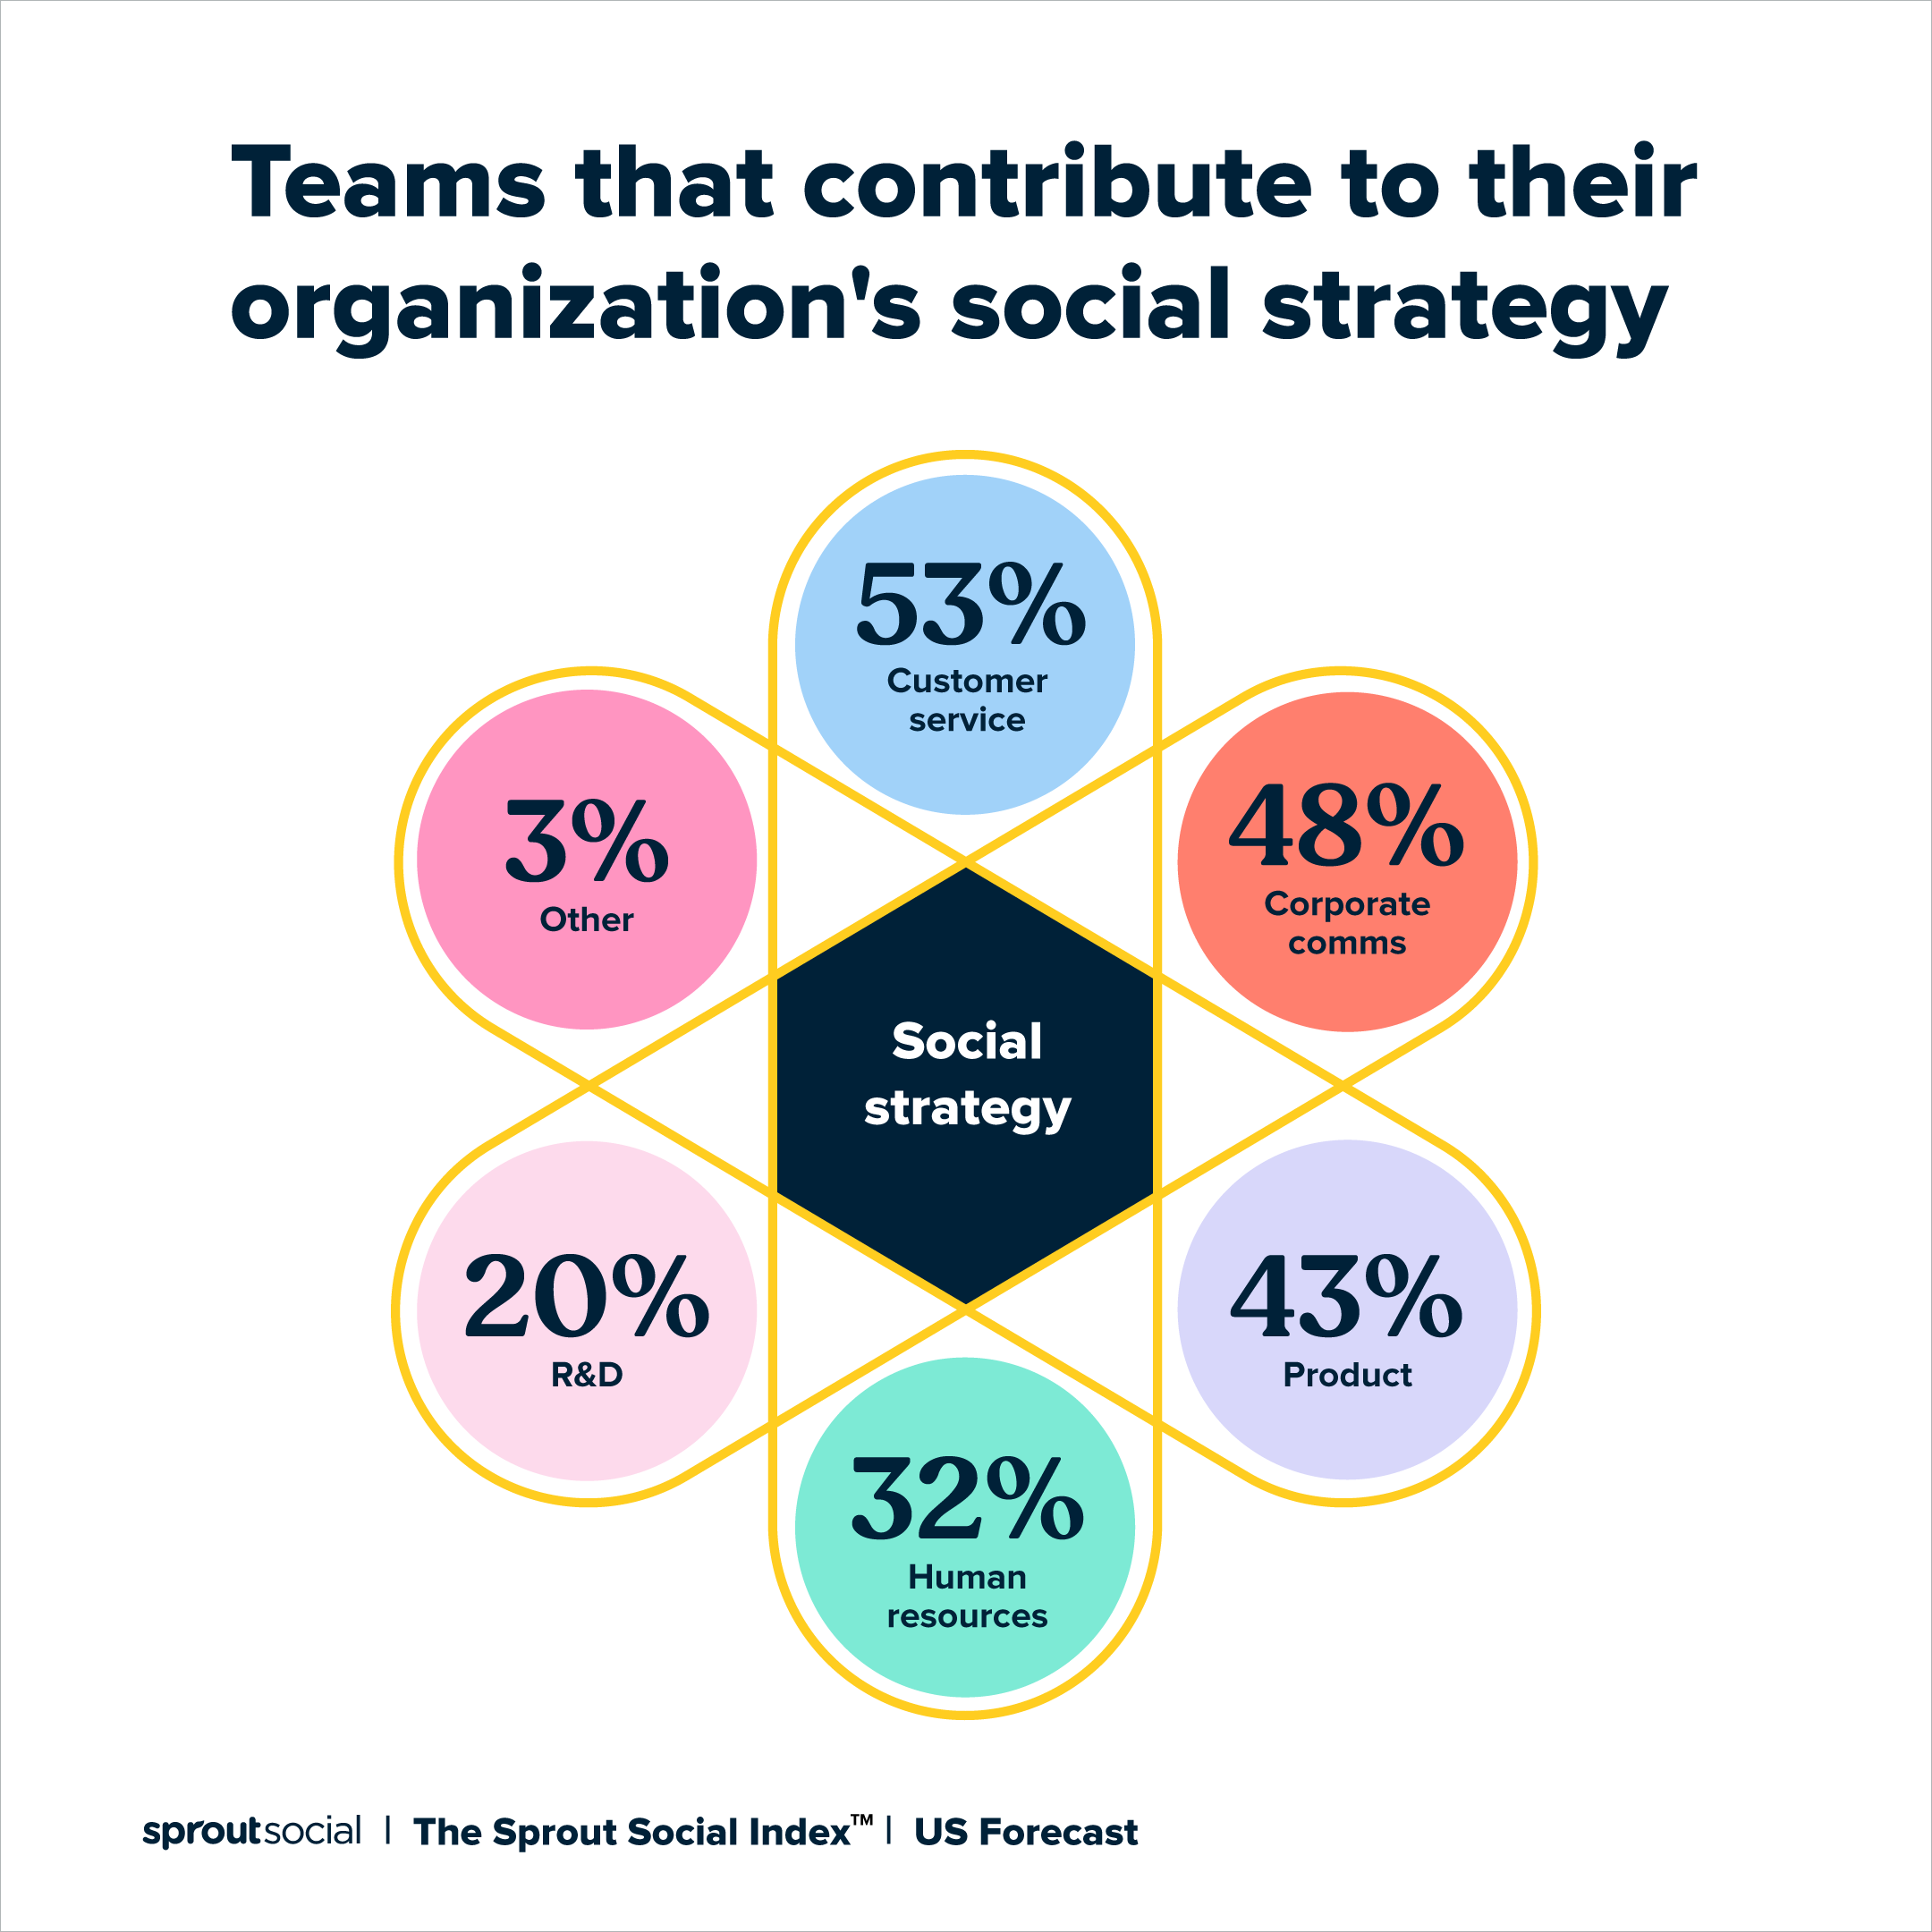 A graphic demonstrating which teams marketers say contribute to their organization's social strategy. The teams include customer service, corporate comms, product, HR and R&D.